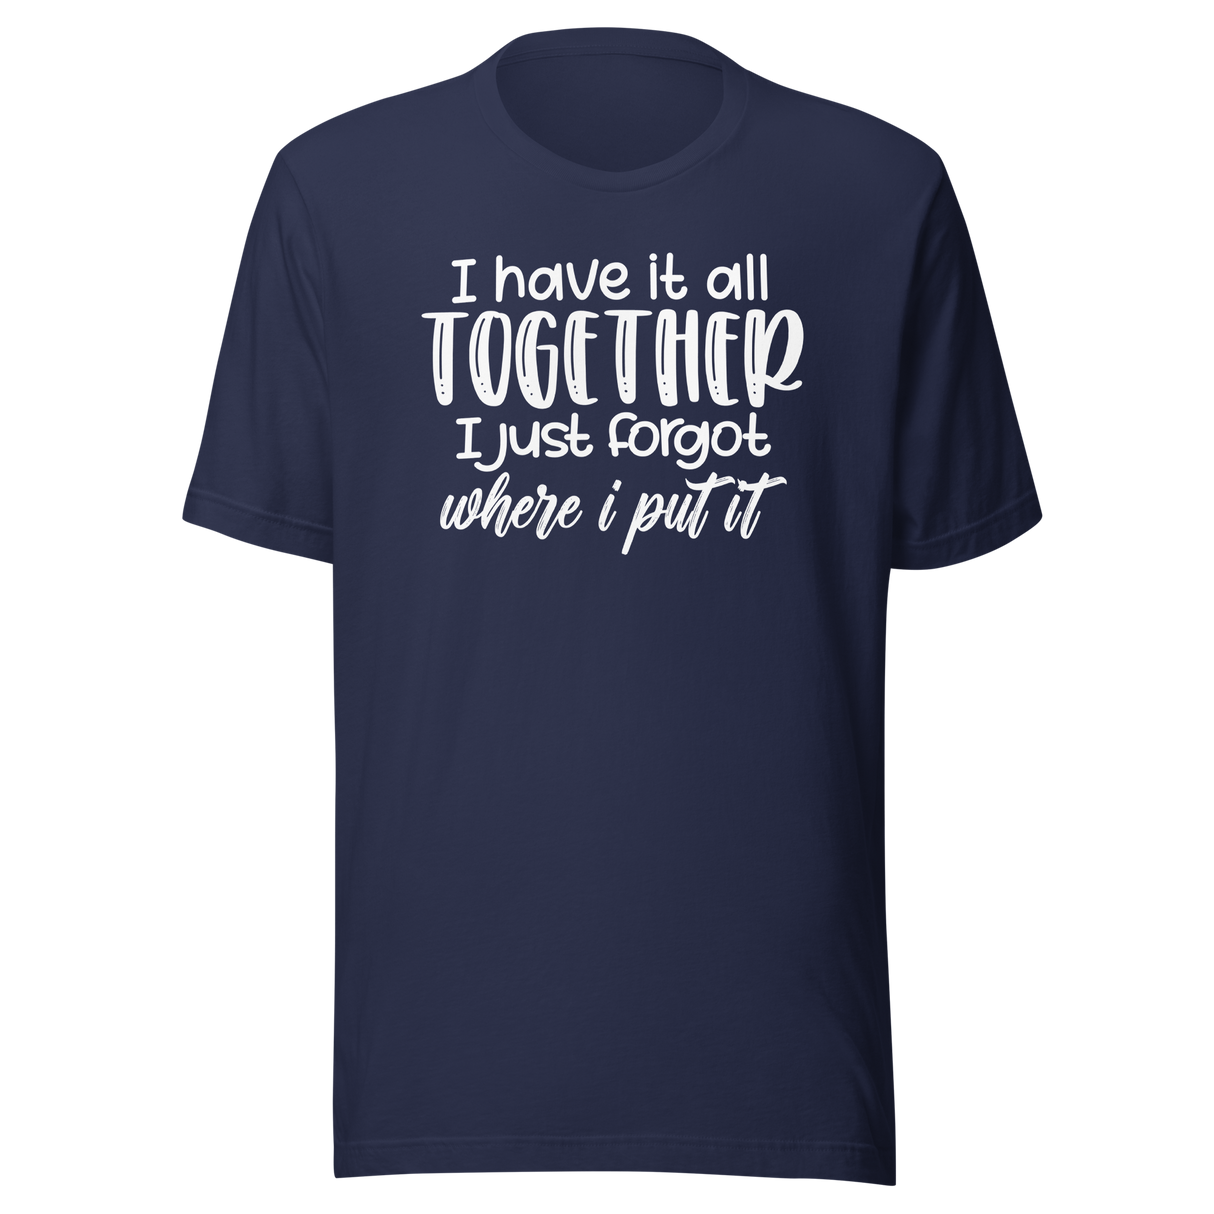 i-have-it-all-together-i-just-forgot-where-i-put-it-life-tee-funny-t-shirt-relatable-tee-organized-t-shirt-forgetful-tee#color_navy